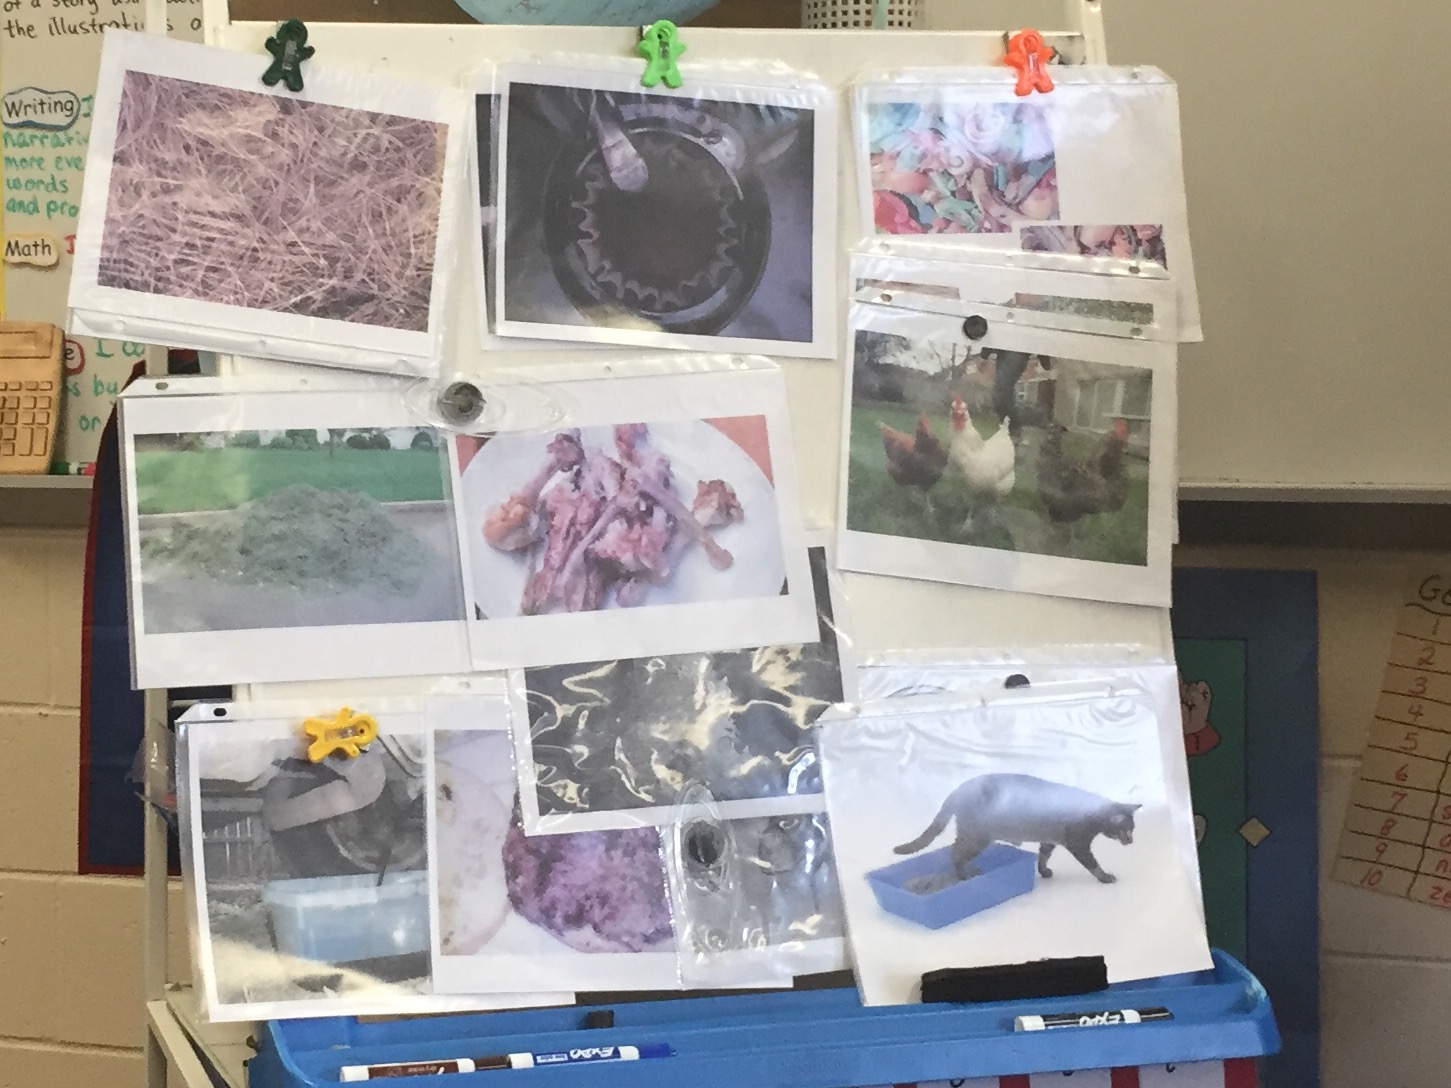 A display of pictures showing some examples of items that can be composted and other items that cannot. 